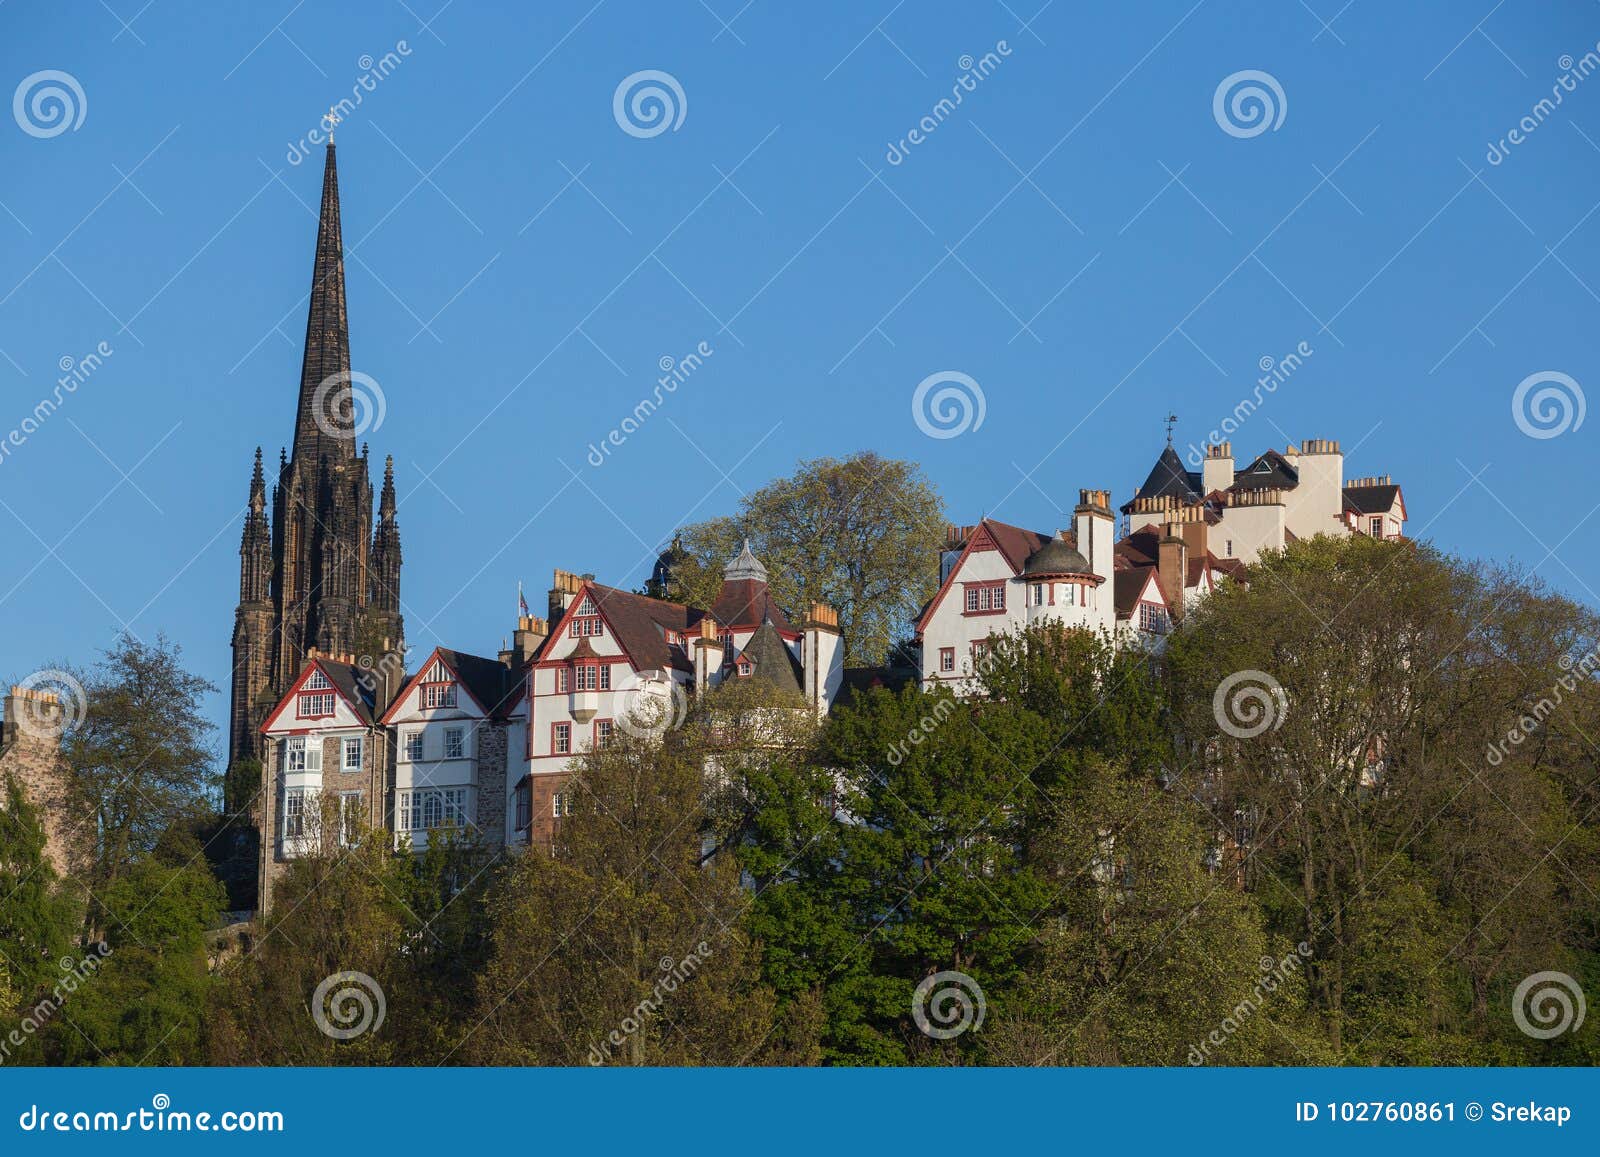 buildings of ramsay gardens with the gothic spire of the hub in e